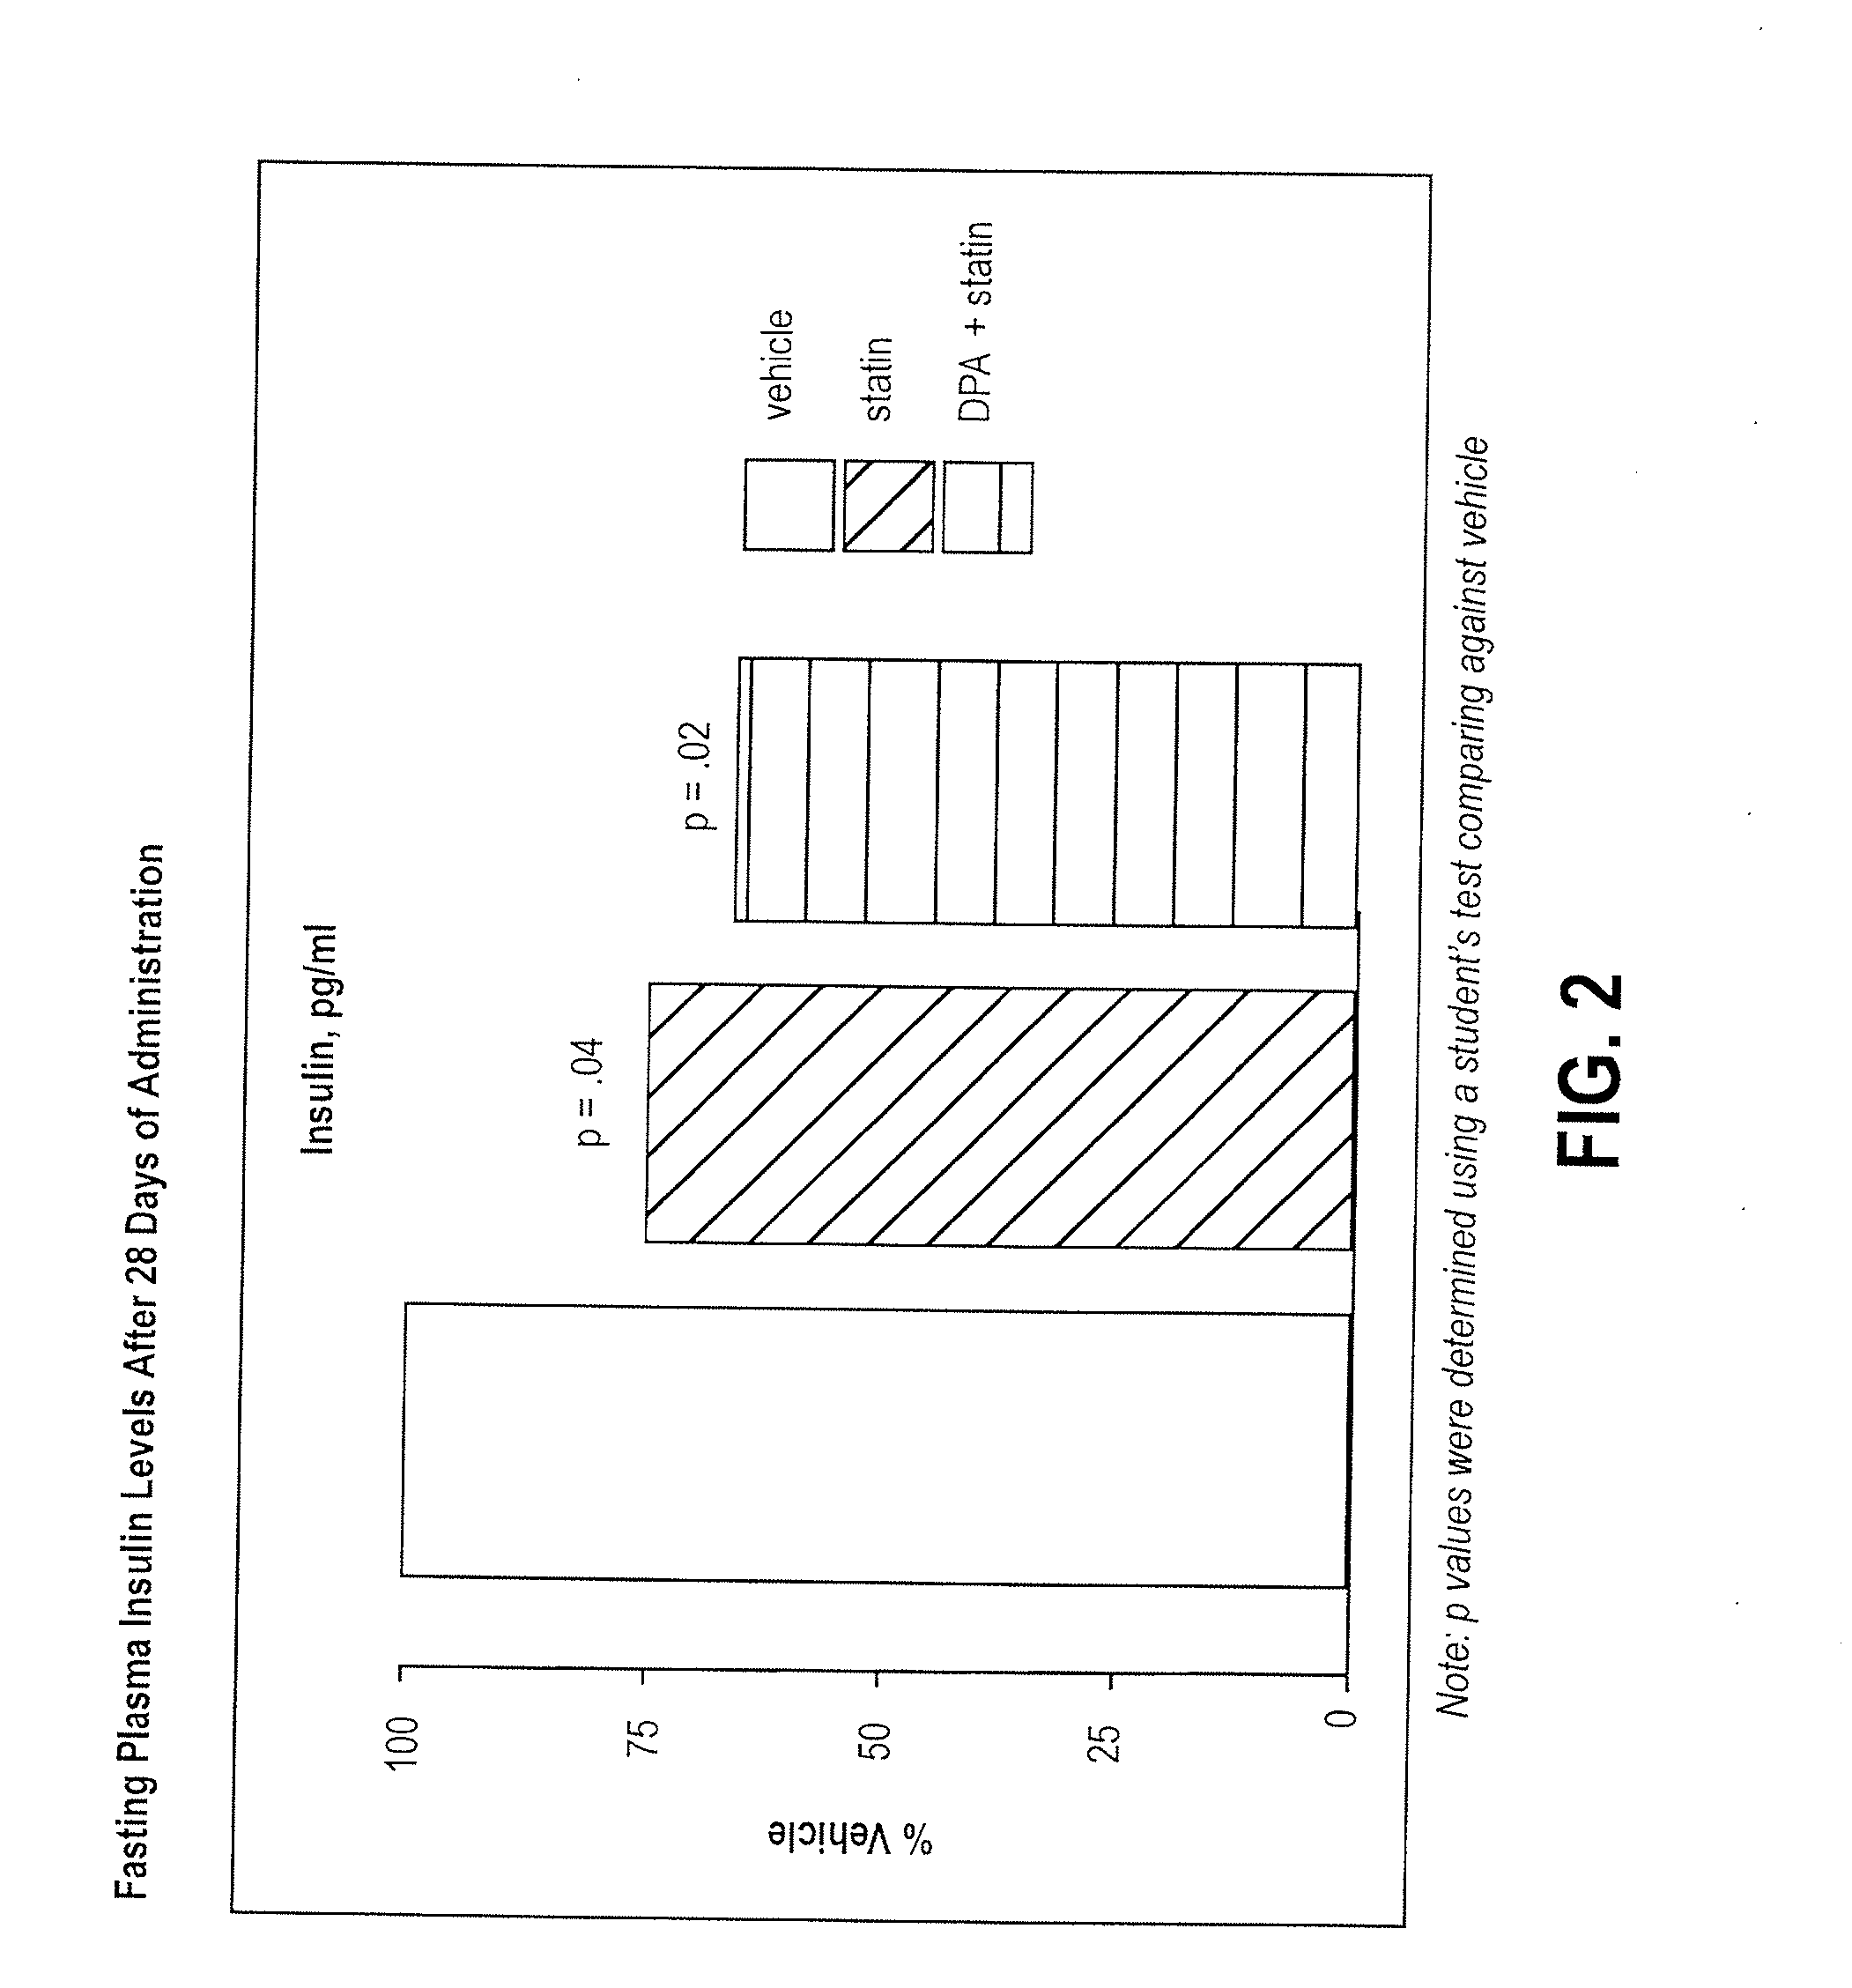 Methods of administering compositions comprising docosapentaenoic acid